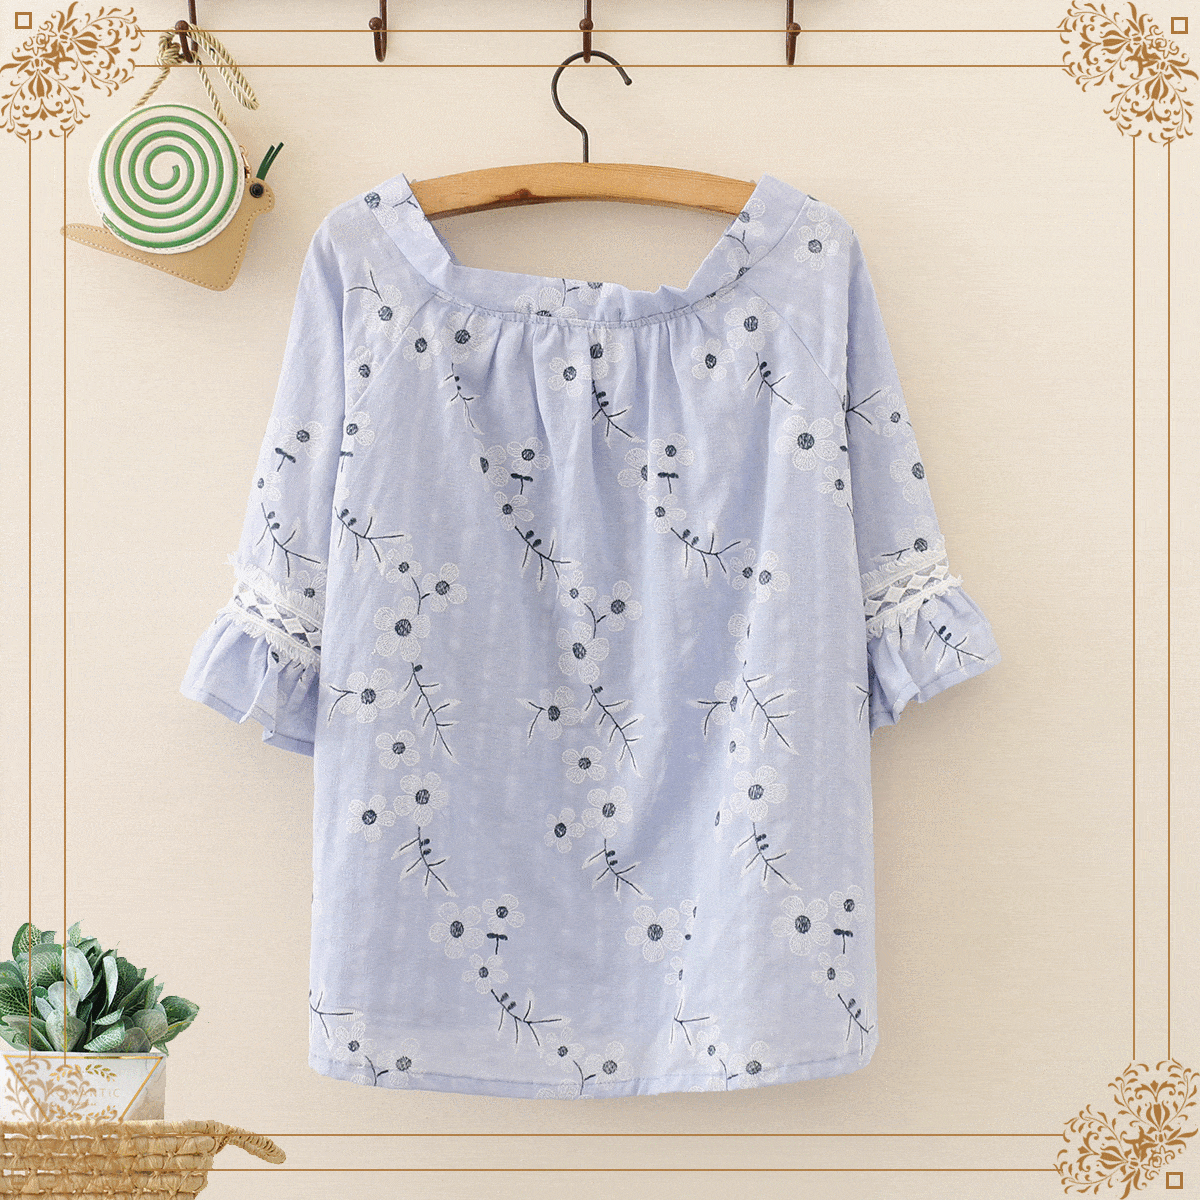 Kawaiifashion One Size Women's Sweet V-neck Floral Embroidered Falbala Sleeved Tees